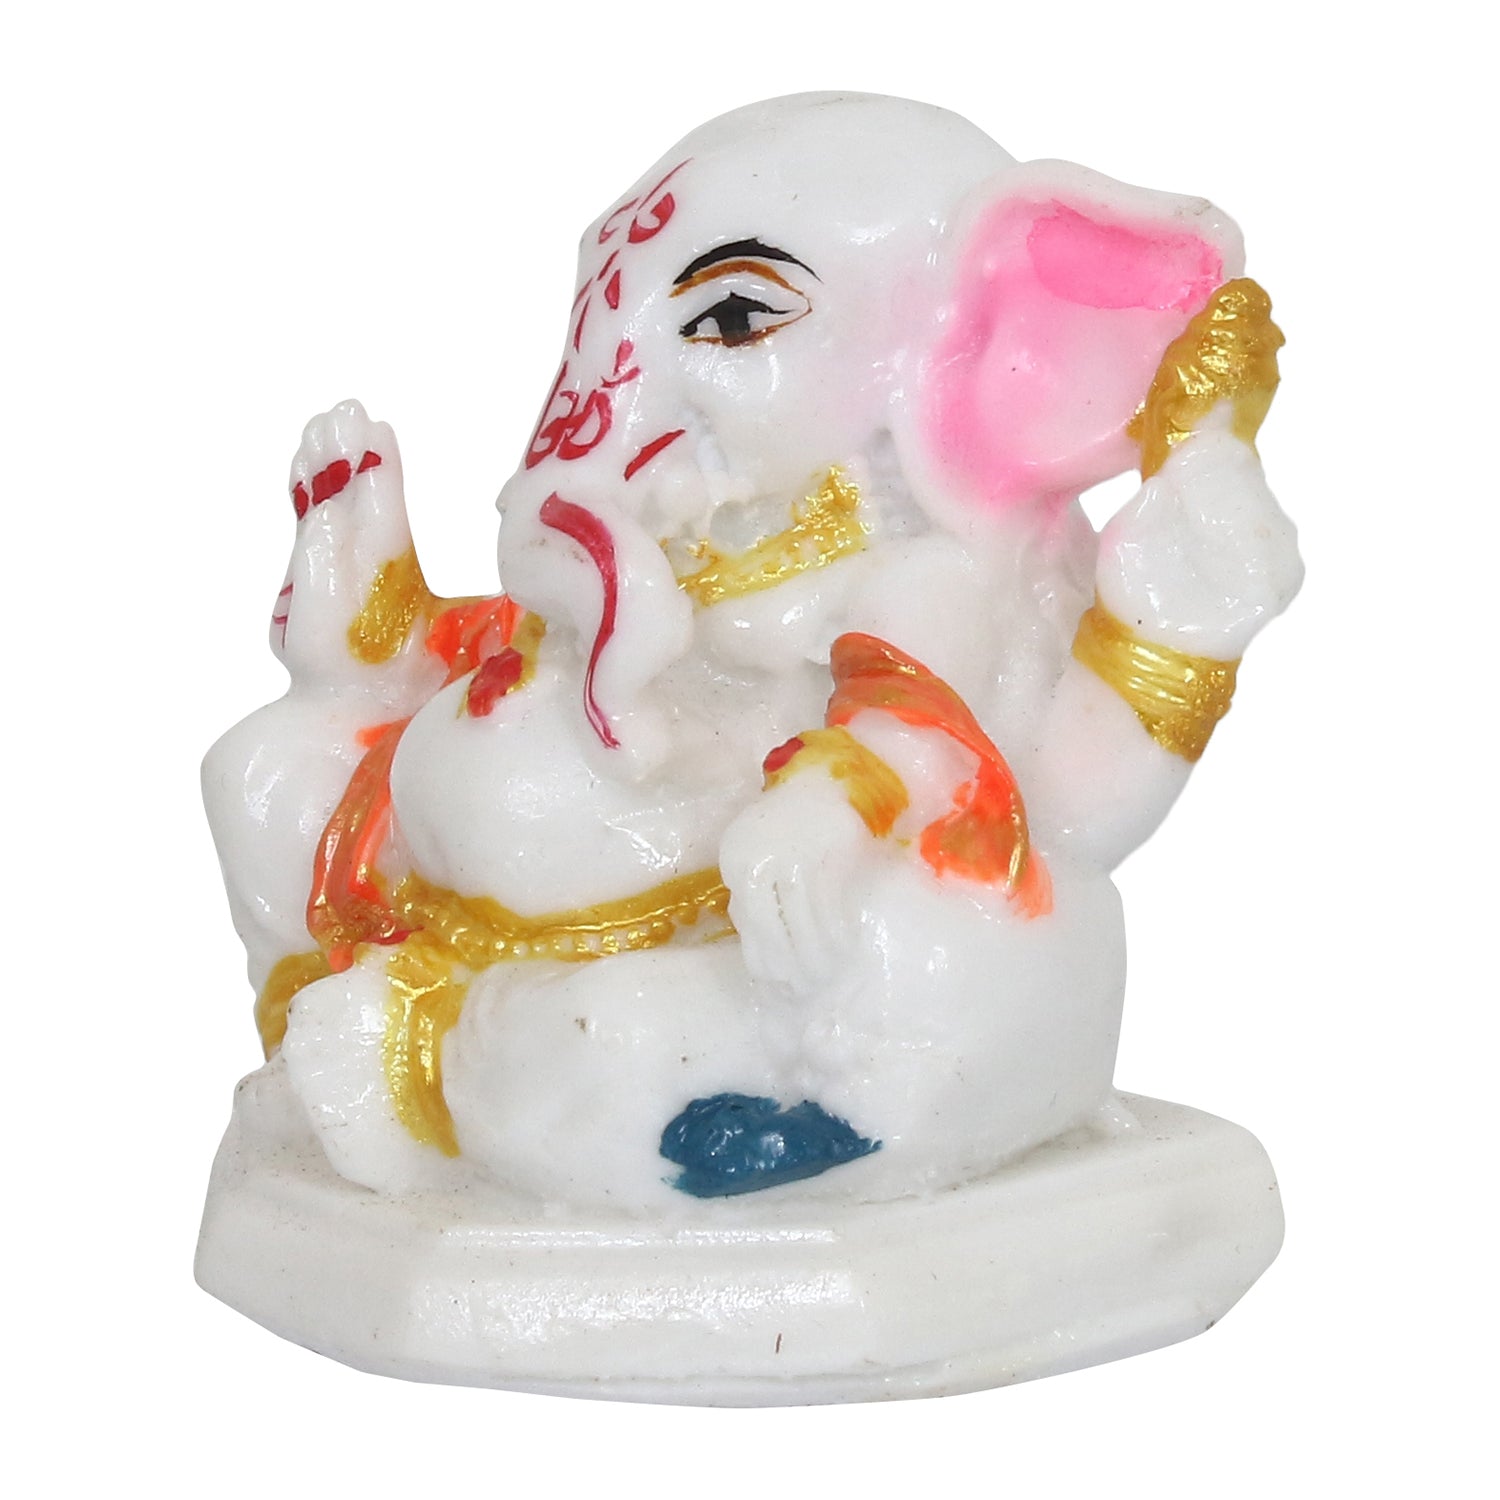 Decorative Lord Ganesha Idol for Car Dashboard, Home Temple and Office Desks 5